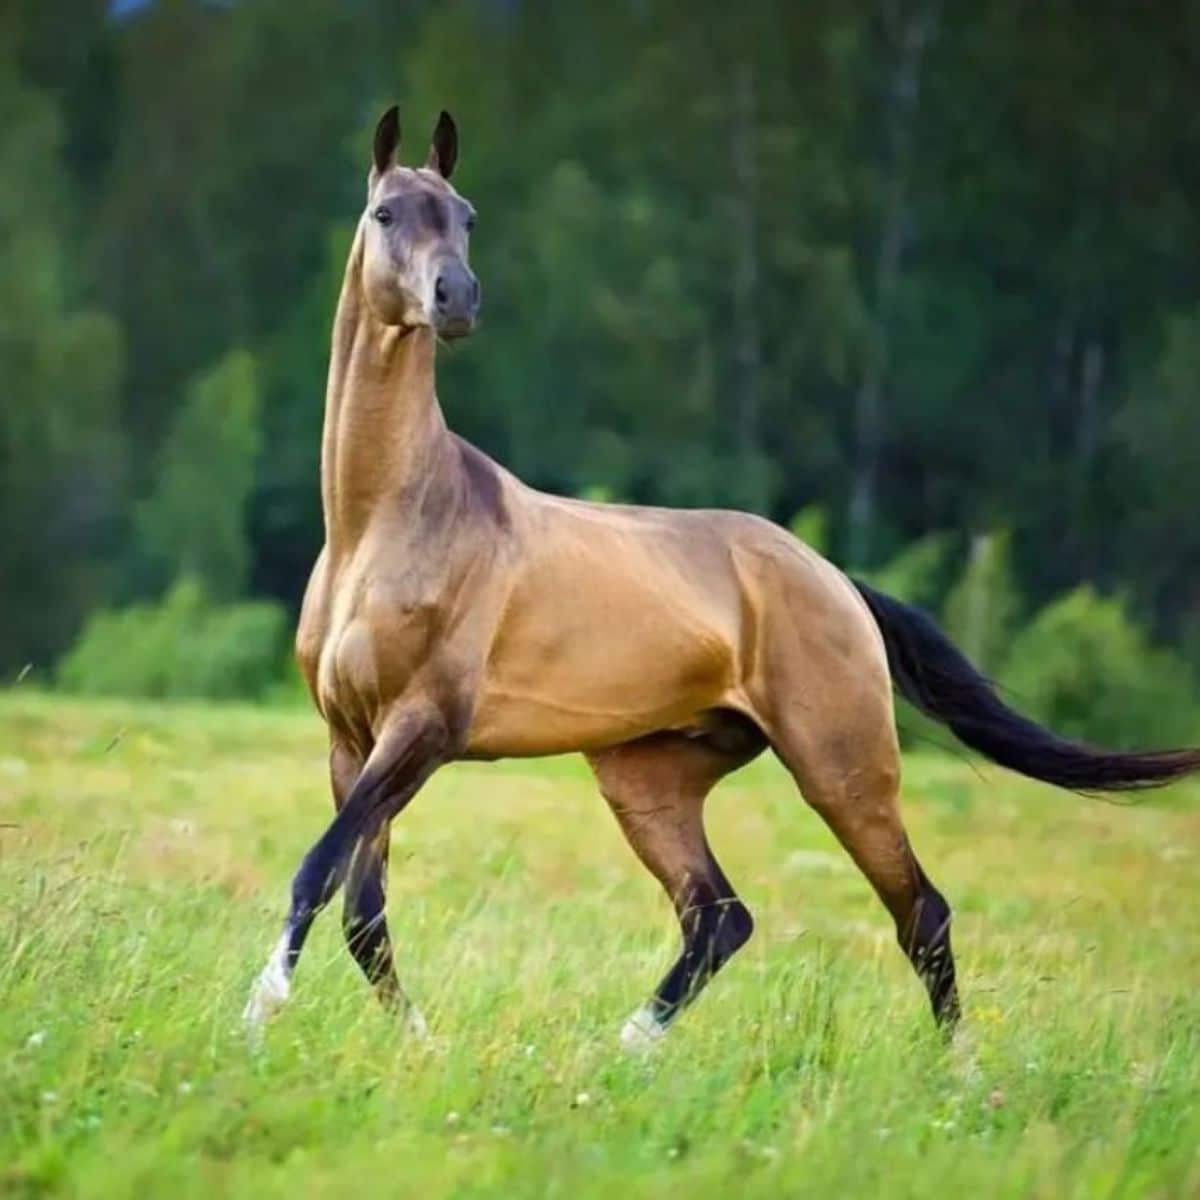 A golden Akhal-Teke horse with a shiny coat stands on a field.